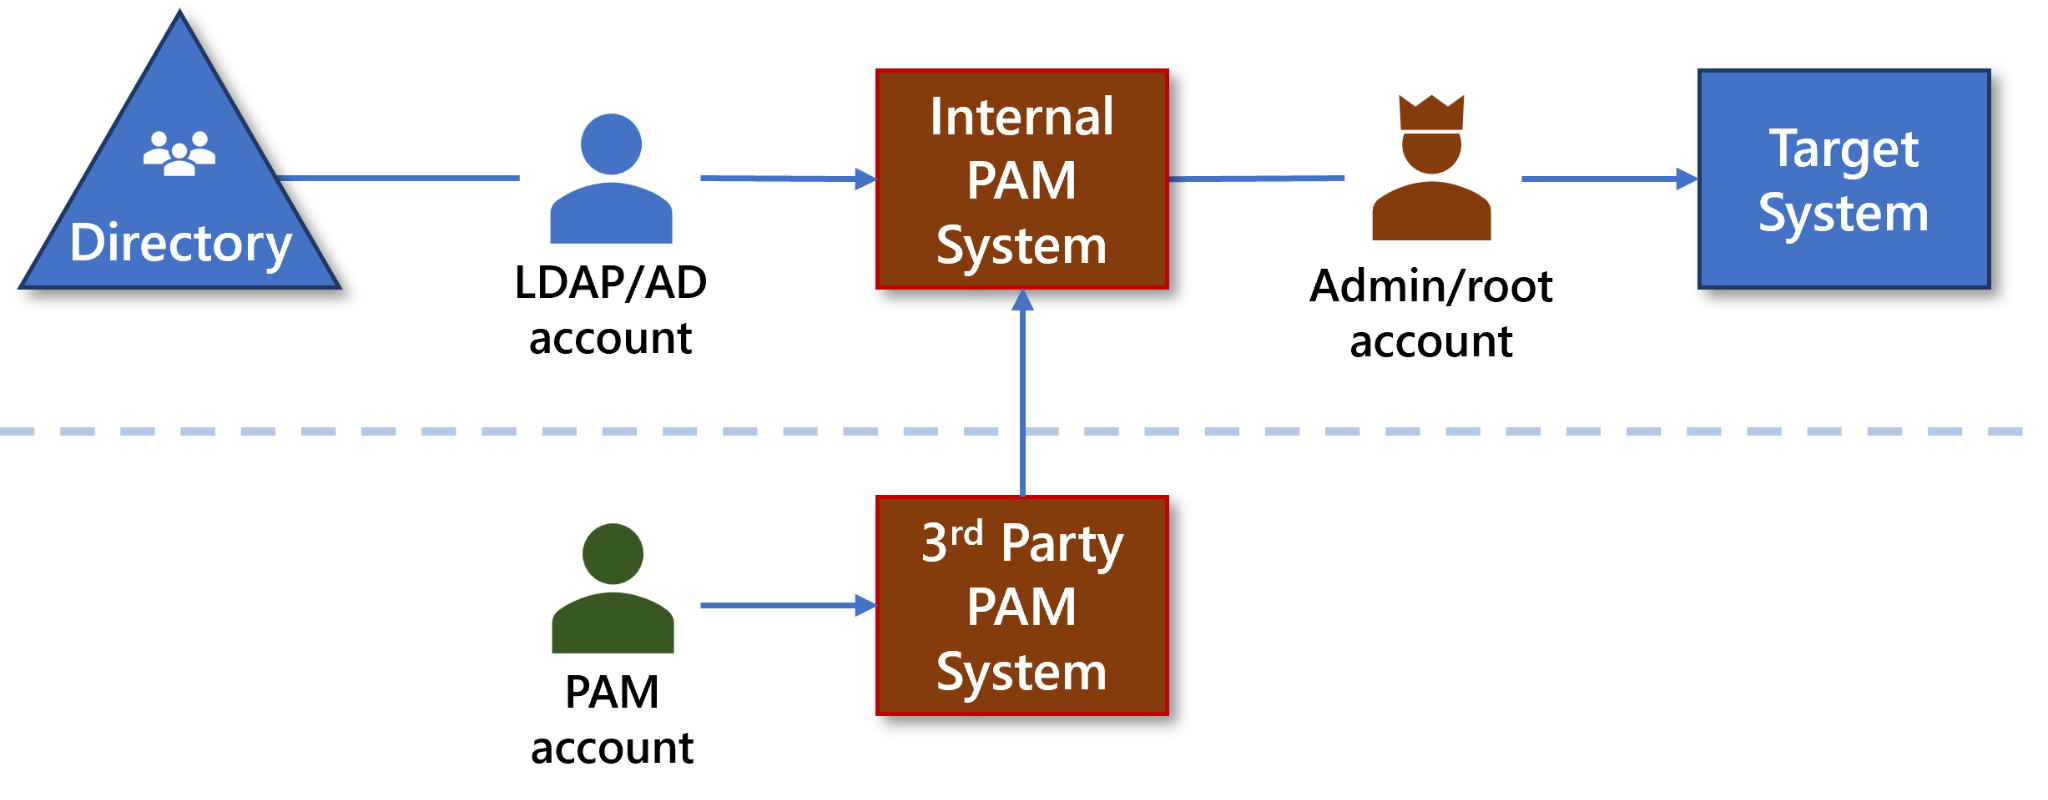 A PAM system in a third-party access model with the internal pam system being fed by the third party PAM system. 